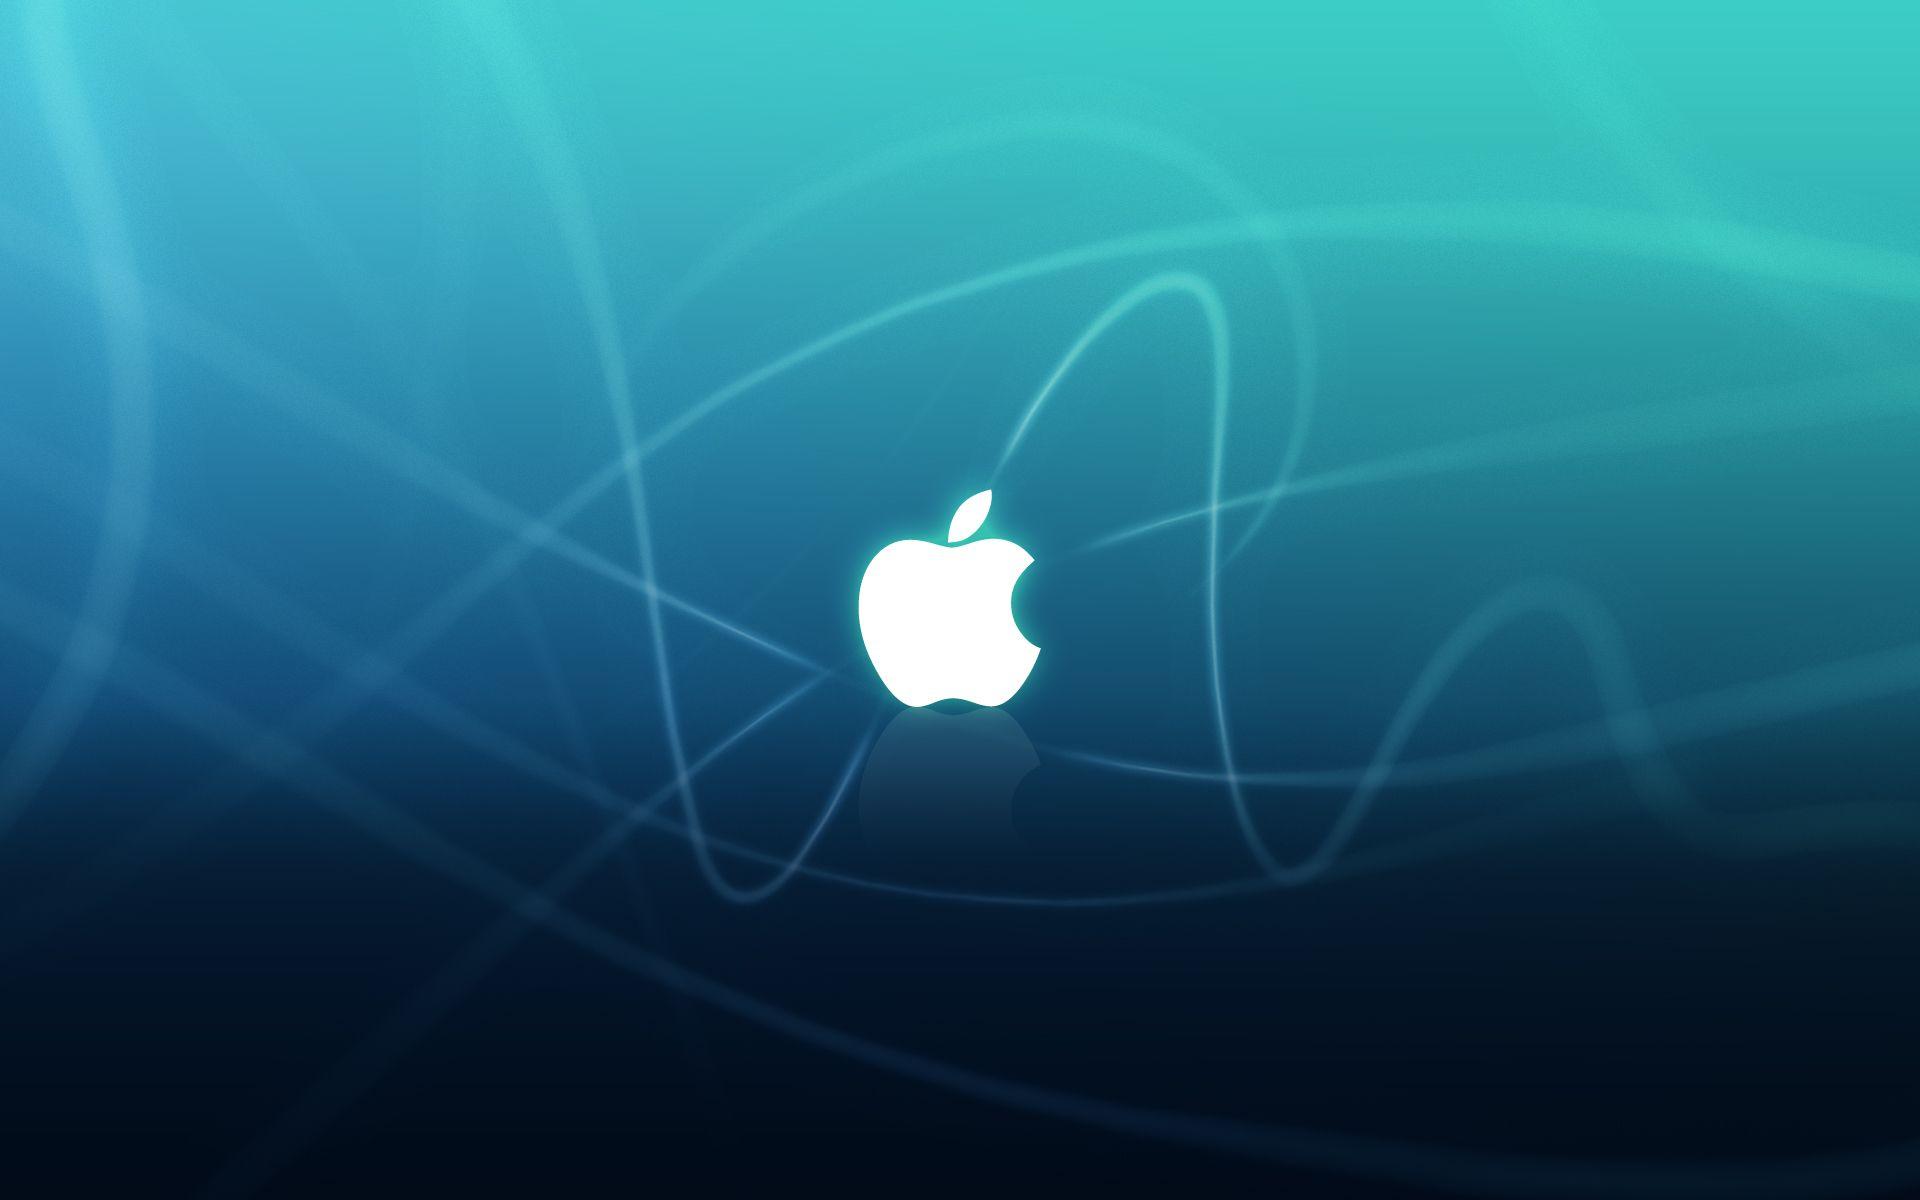 Wallpaper For > Awesome Desktop Background Mac